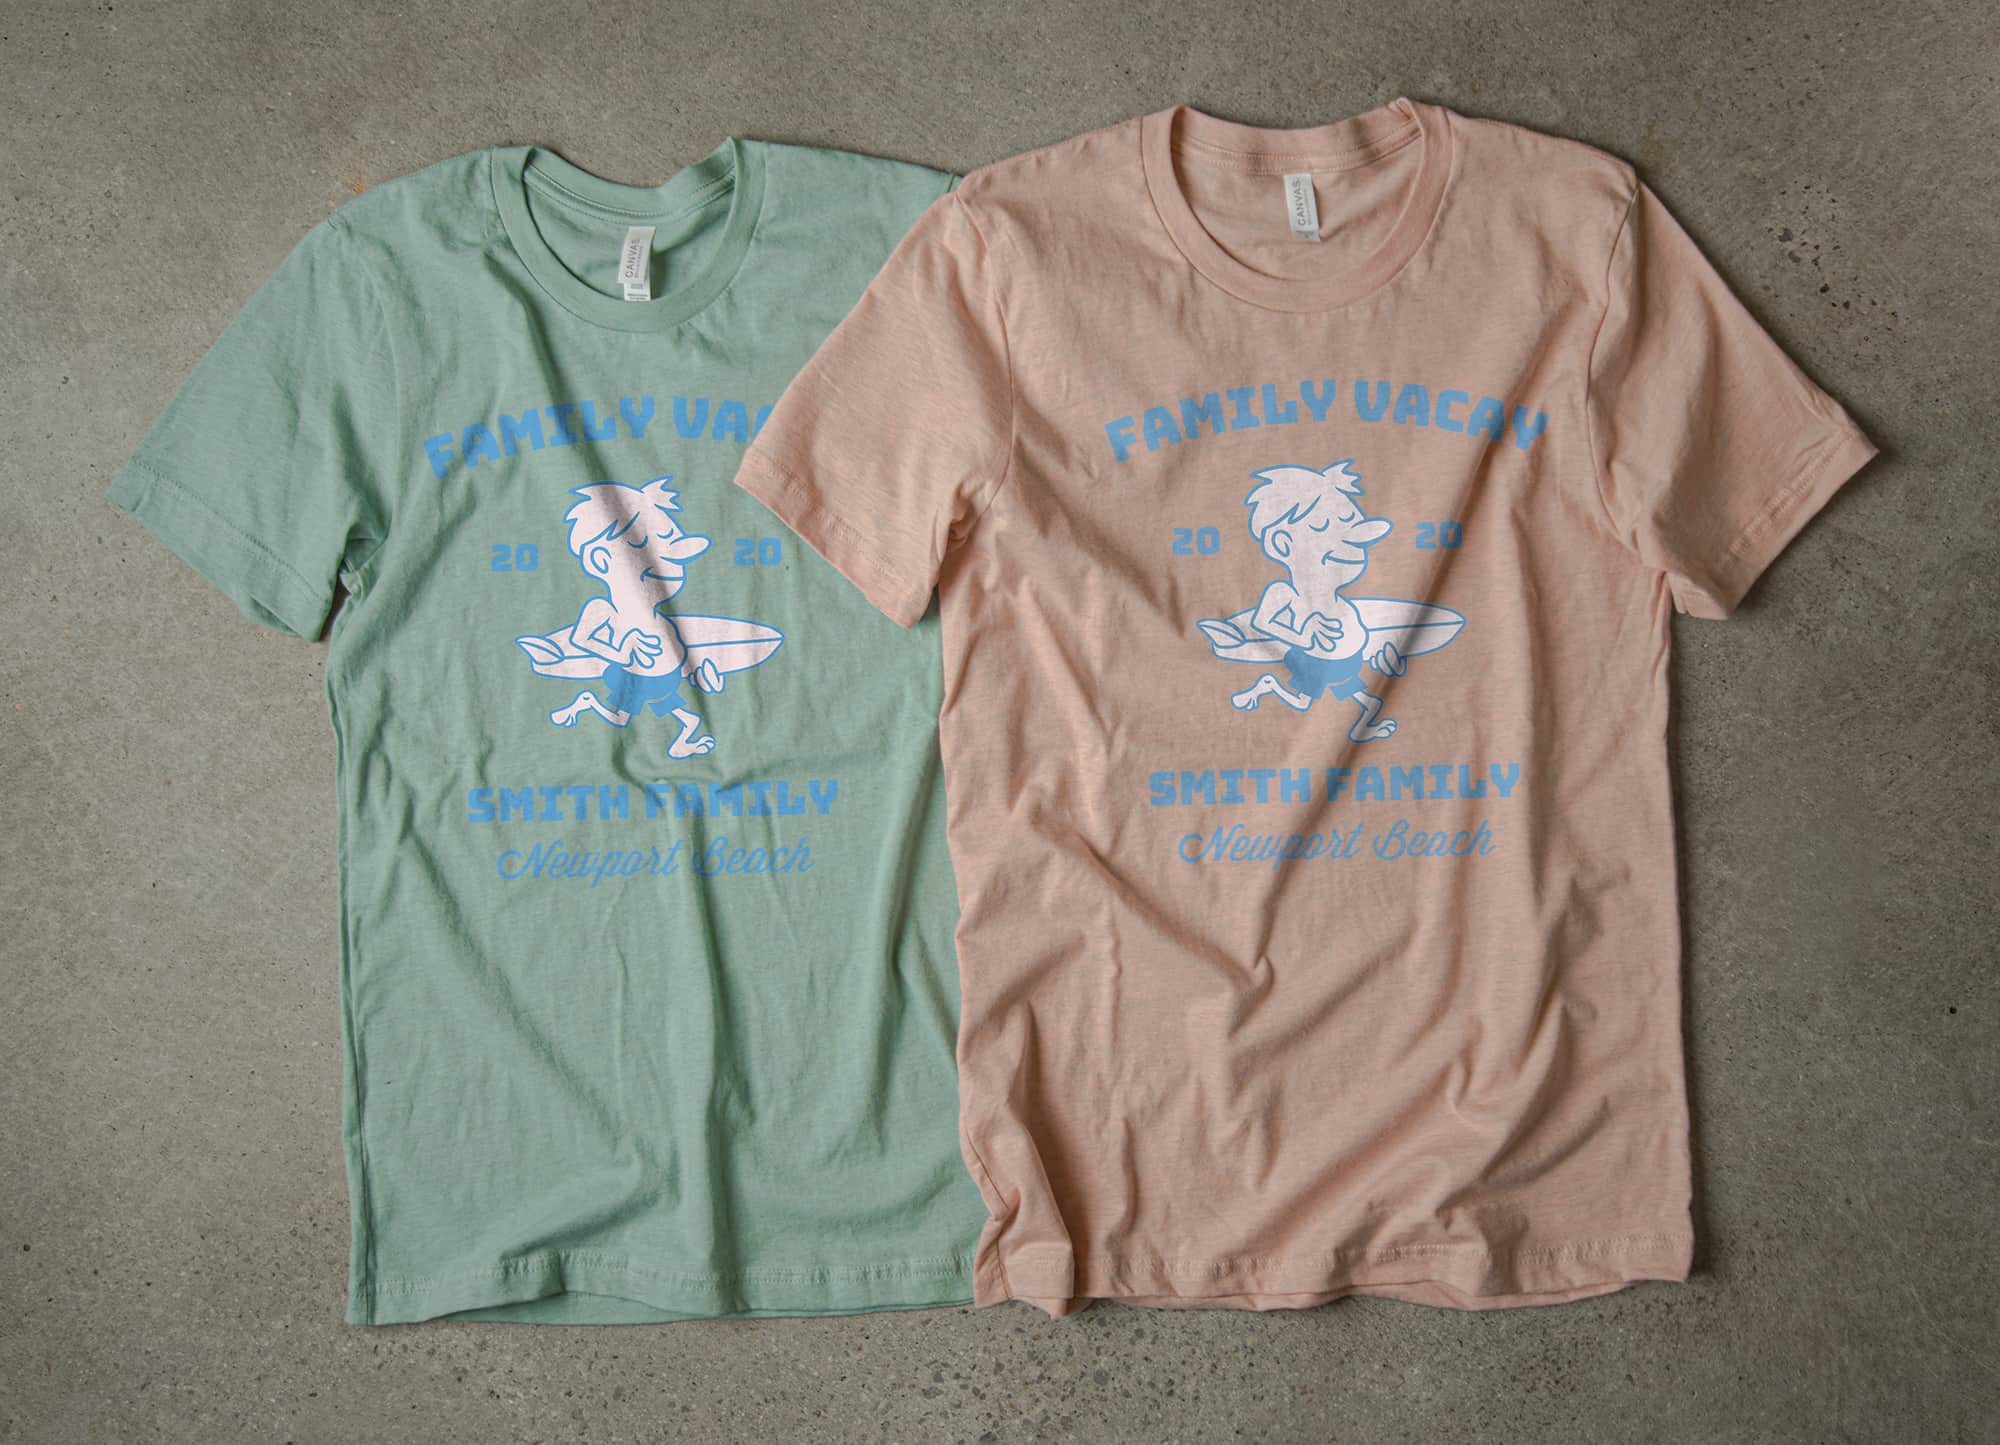 A family vacation t-shirt design made to exemplify the pretty pastel color pallet.